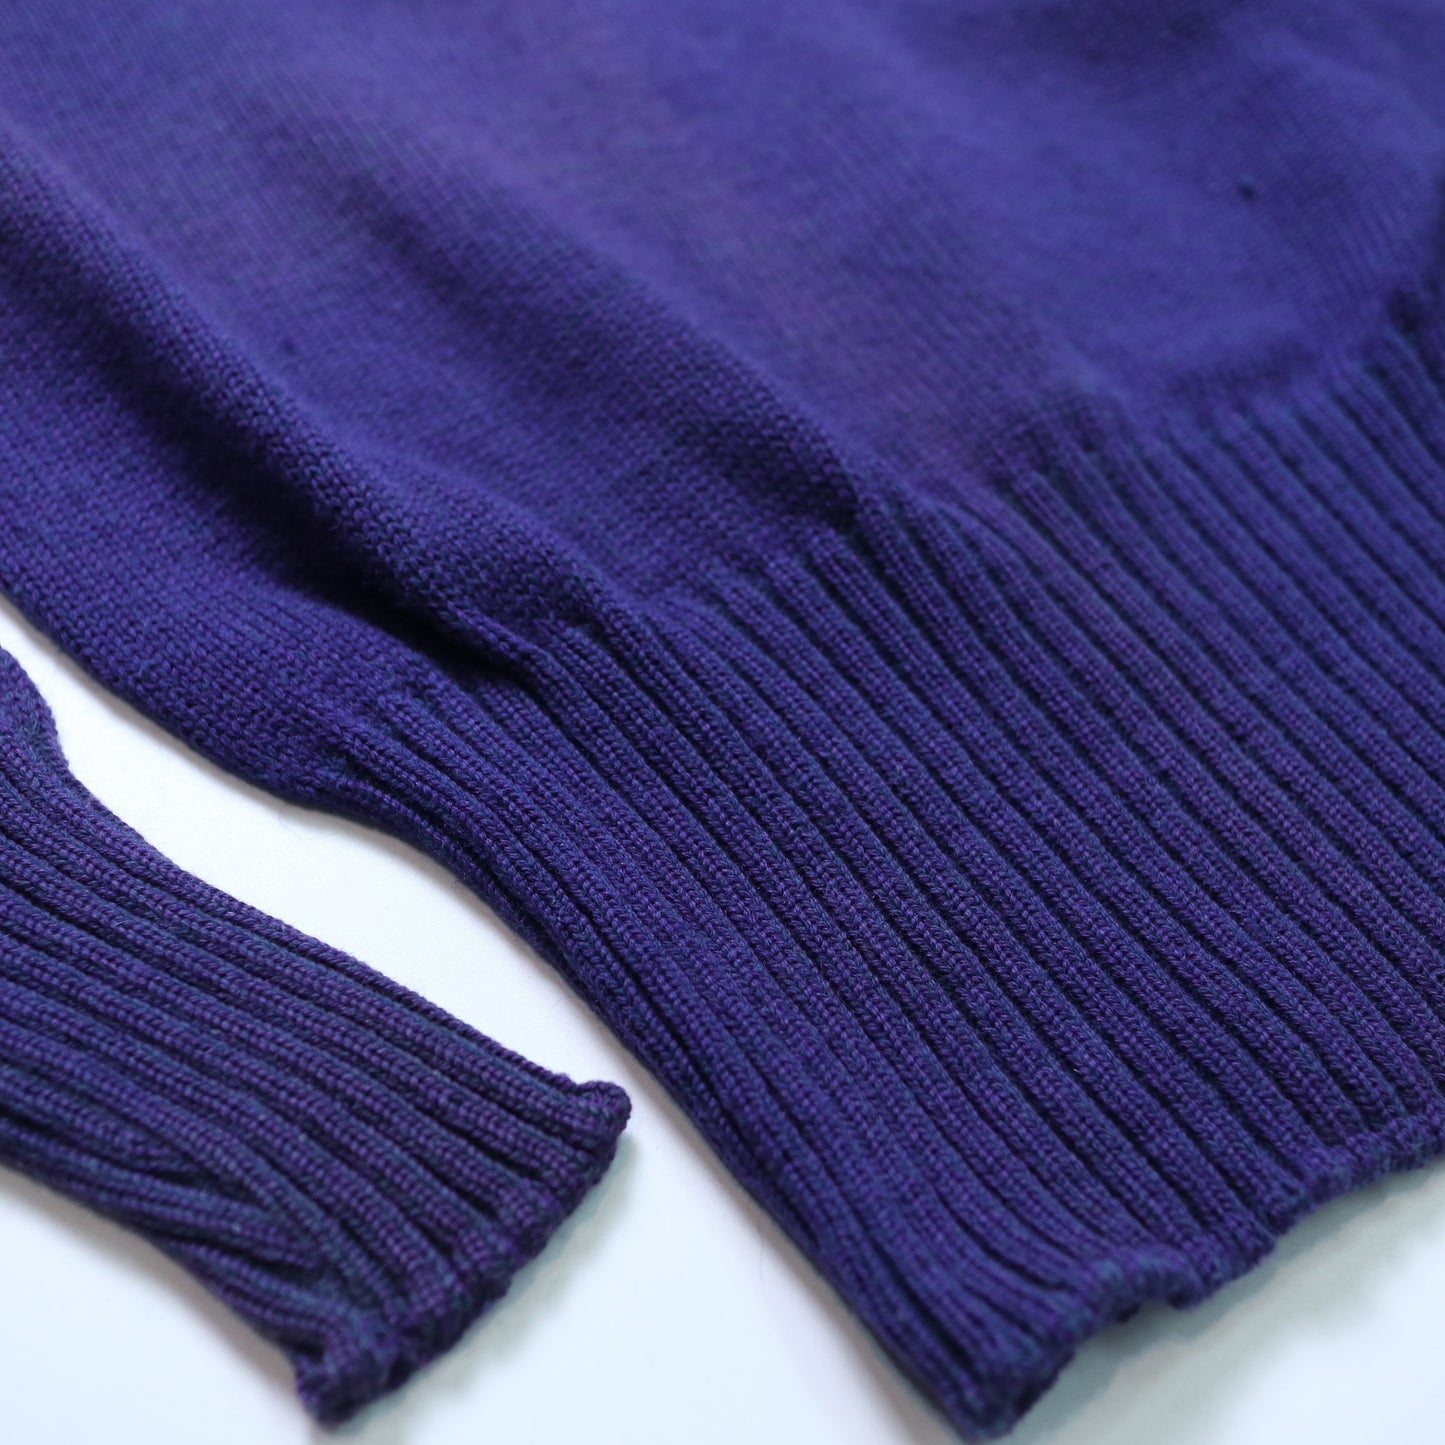 1940s Rugby sportwear Letterman Sweater blue and purple knitted sweater